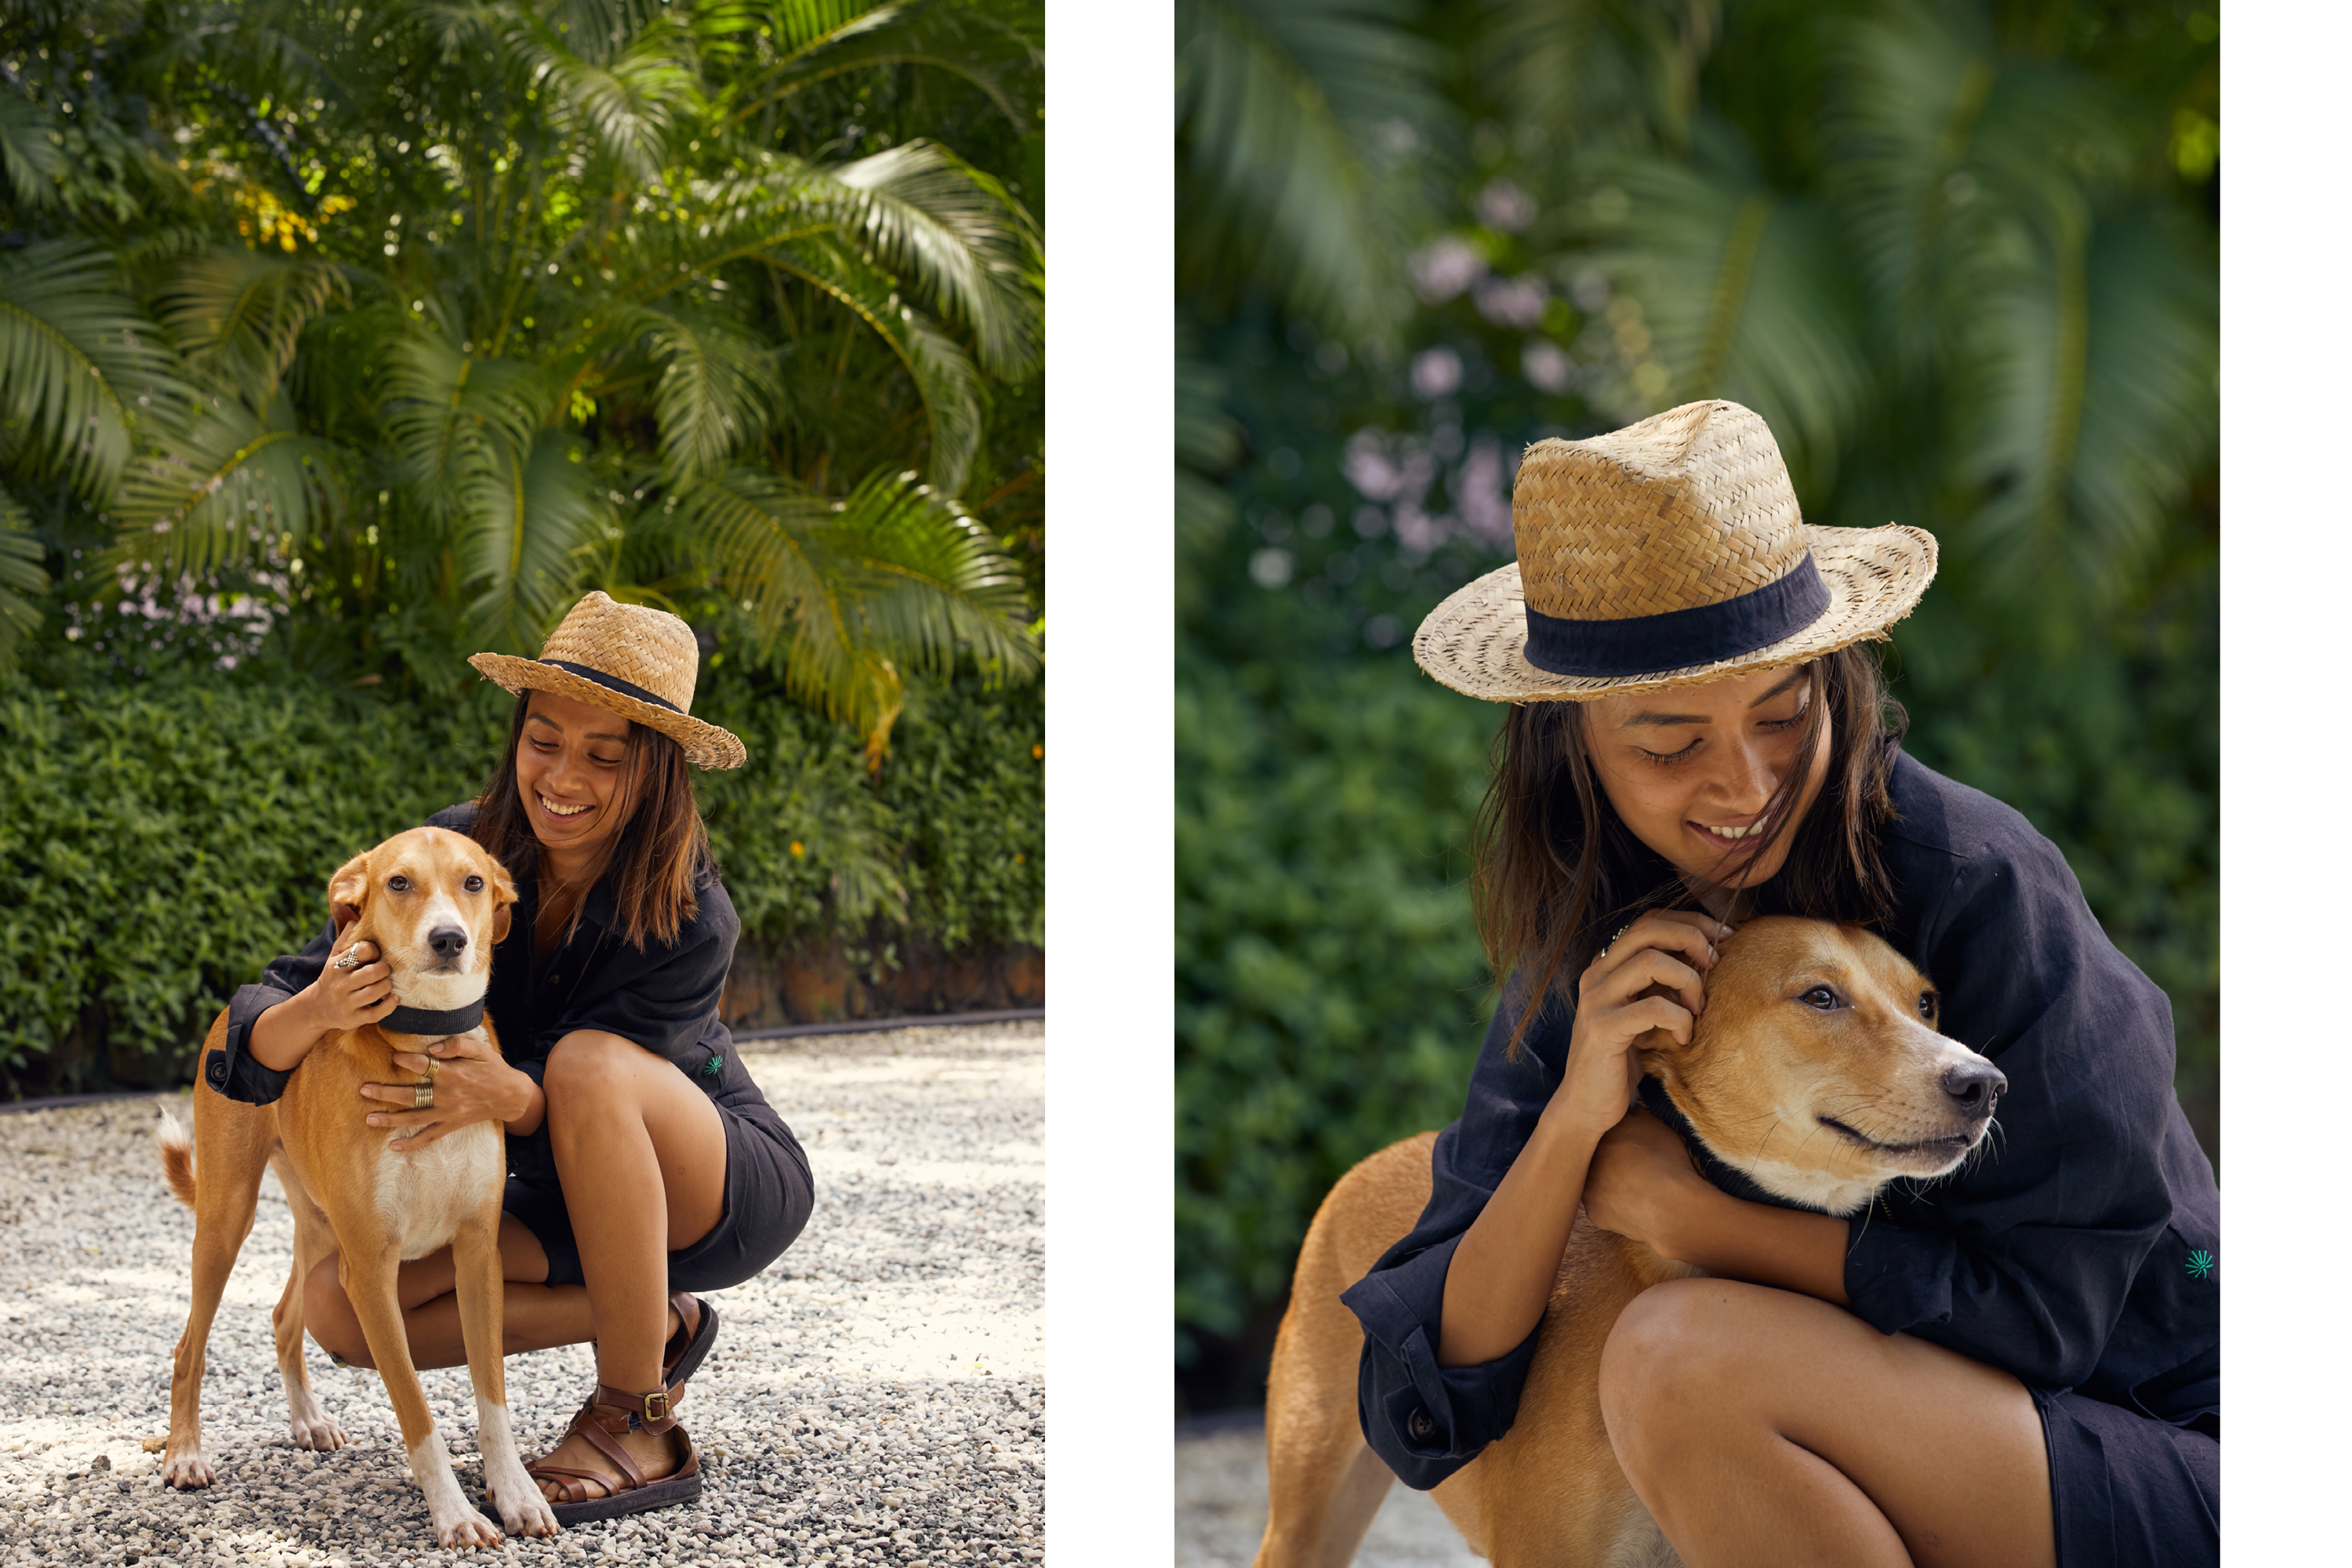 A Day with Paloma - Believer of Natural Lifestyle, A Dog Lover, Surfer, Fitness Enthusiast, Fashion Model